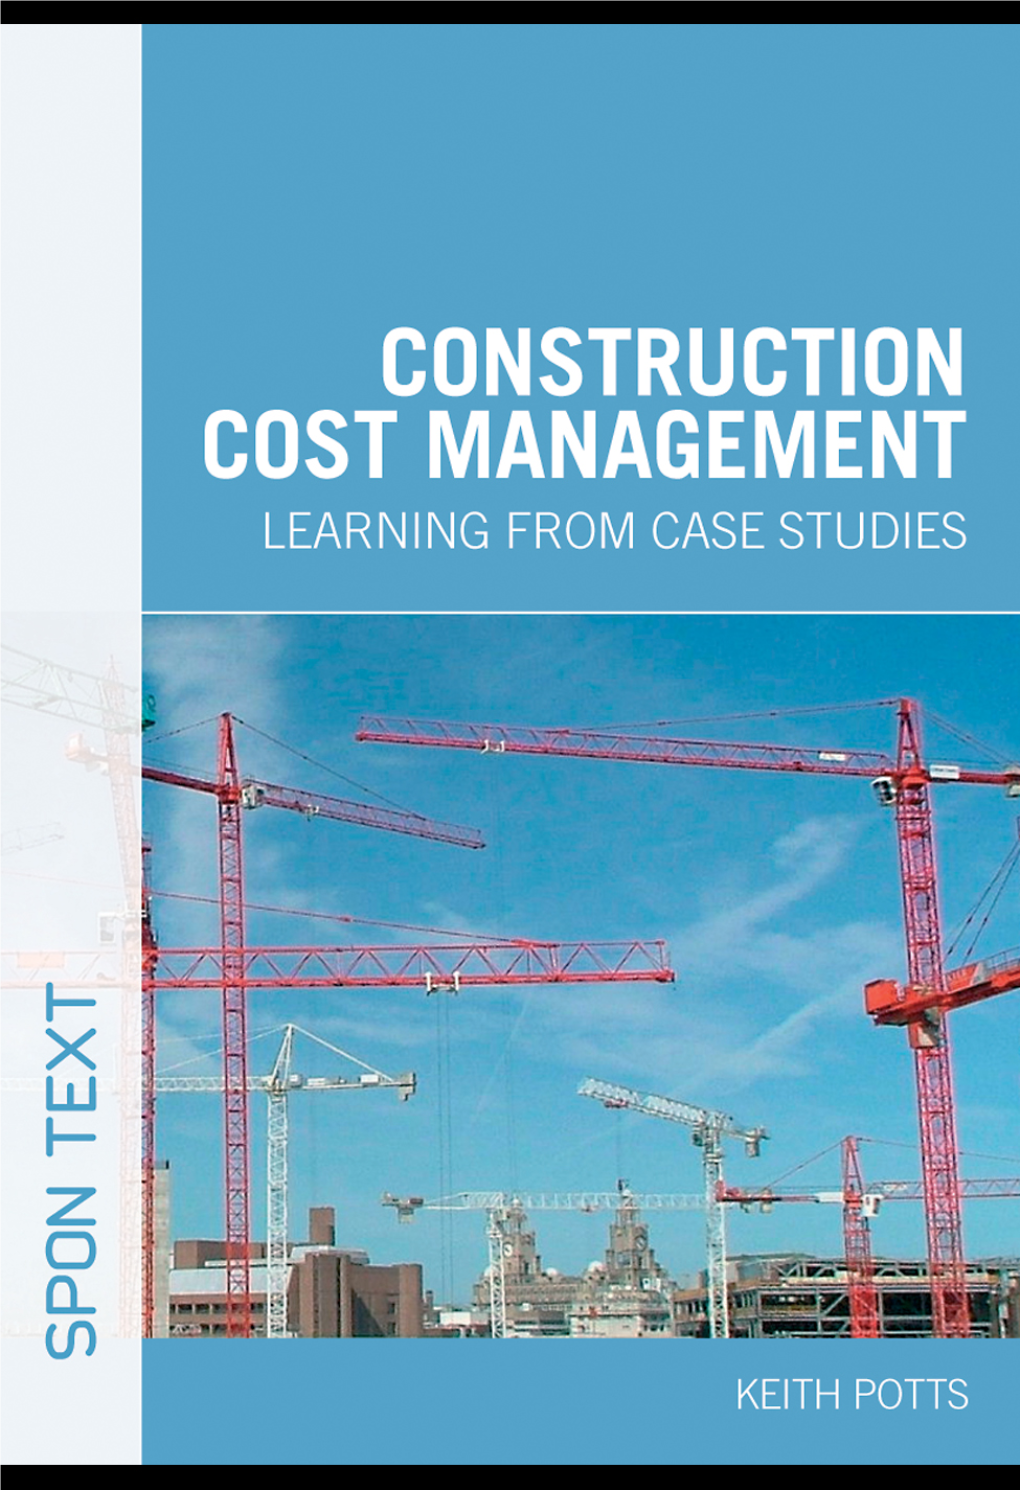 Construction Cost Management: Learning from Case Studies / Keith Potts